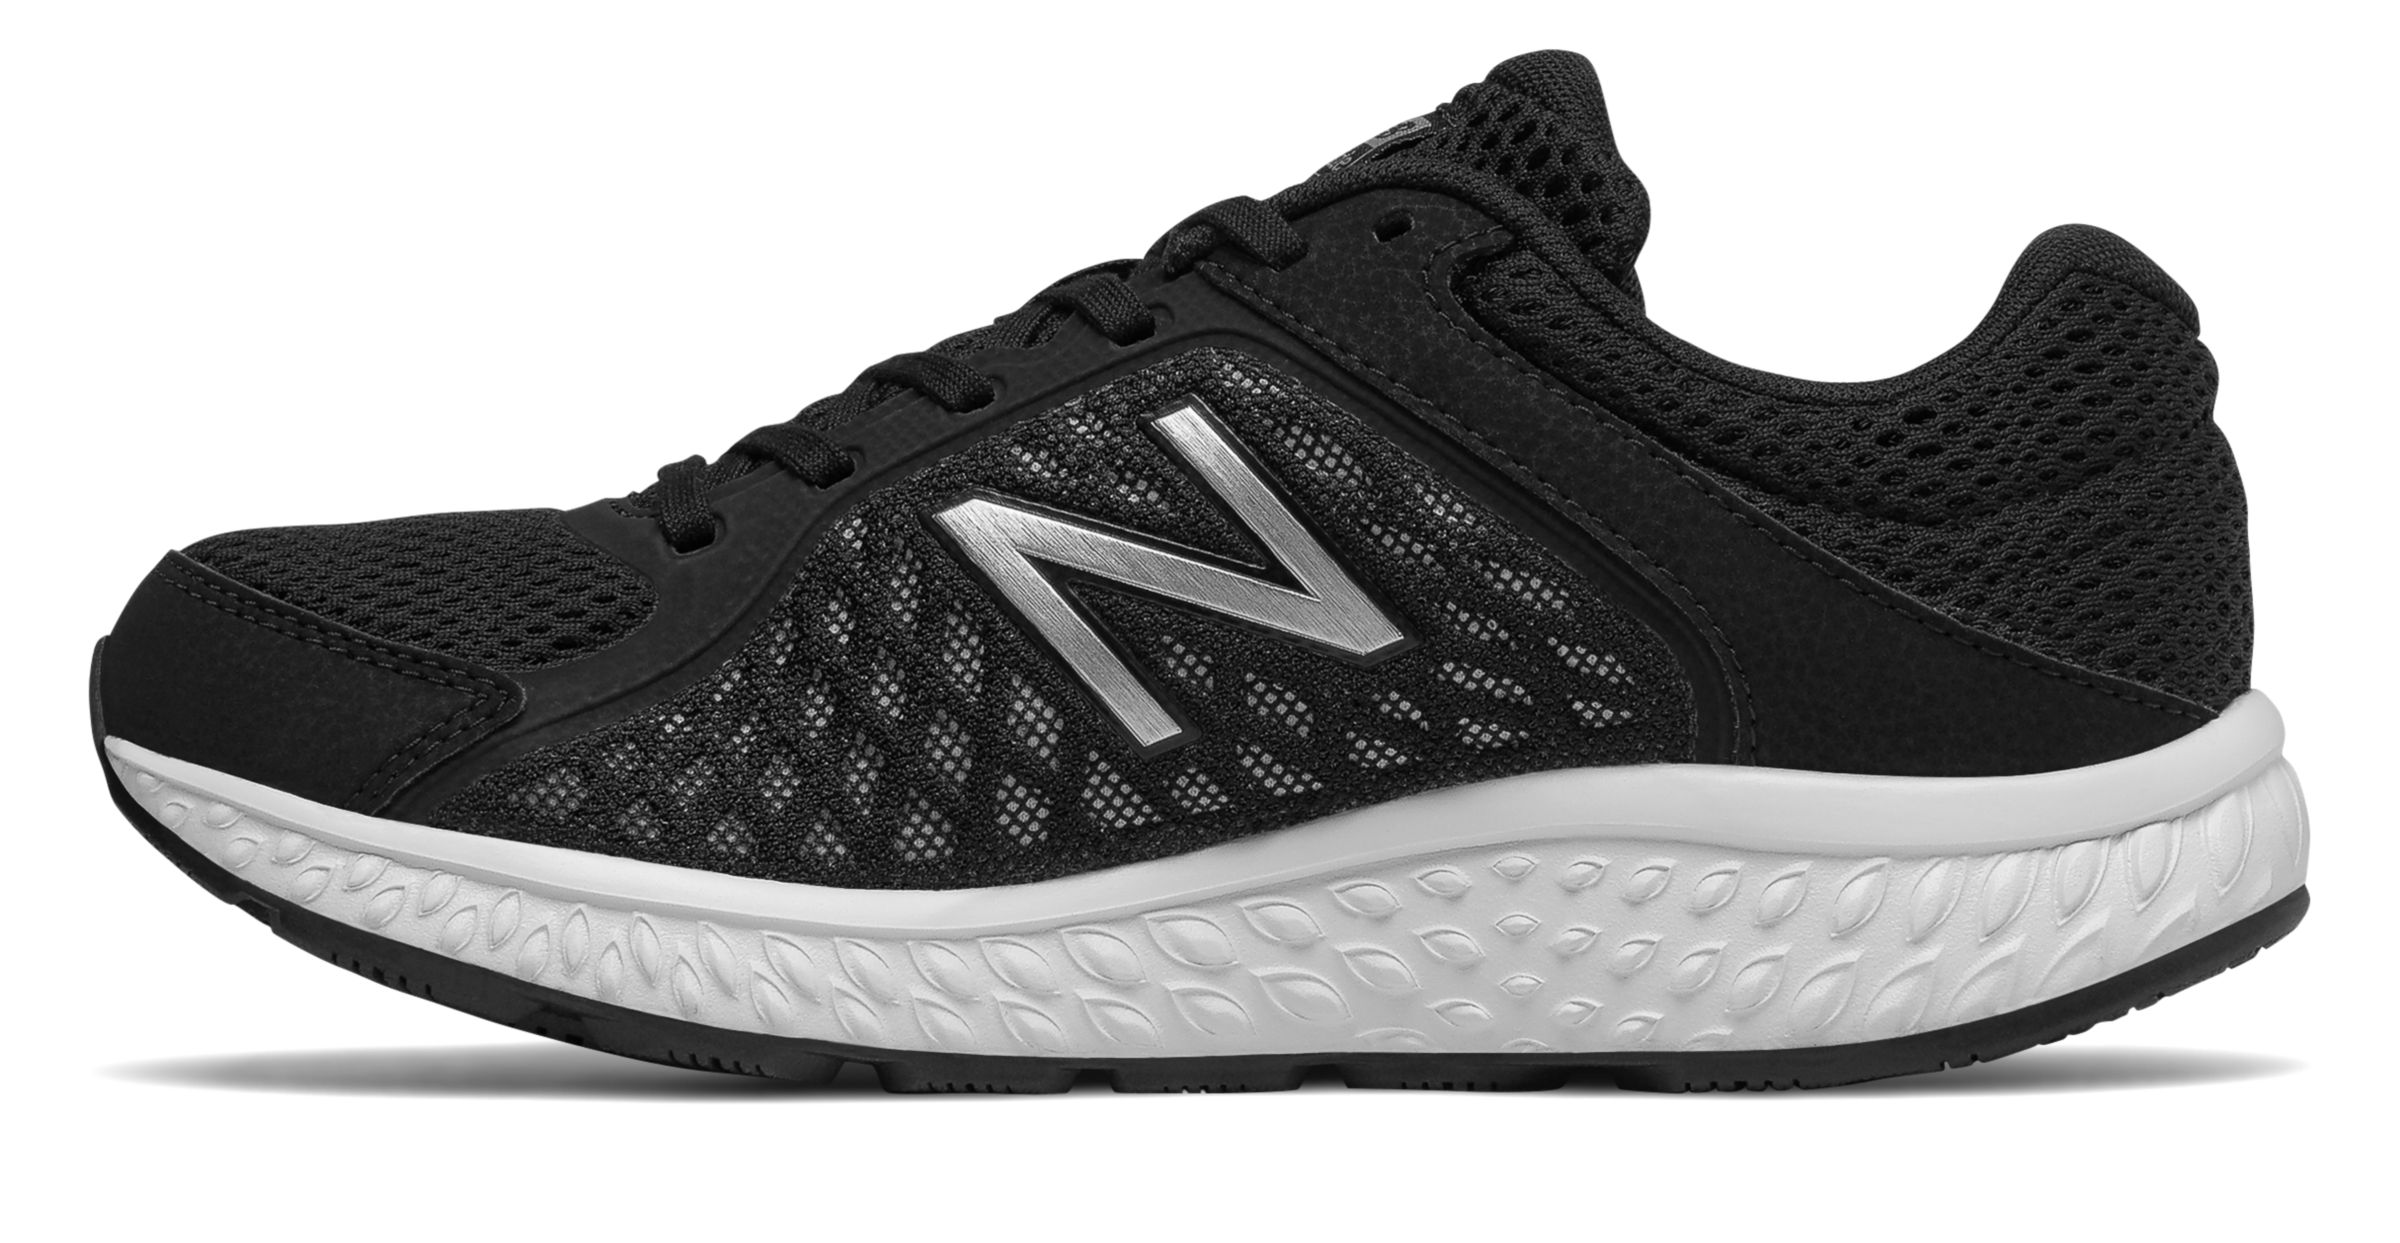 New Balance W420-V4 on Sale - Discounts Up to 67% Off on W420LB4 at Joe's  New Balance Outlet